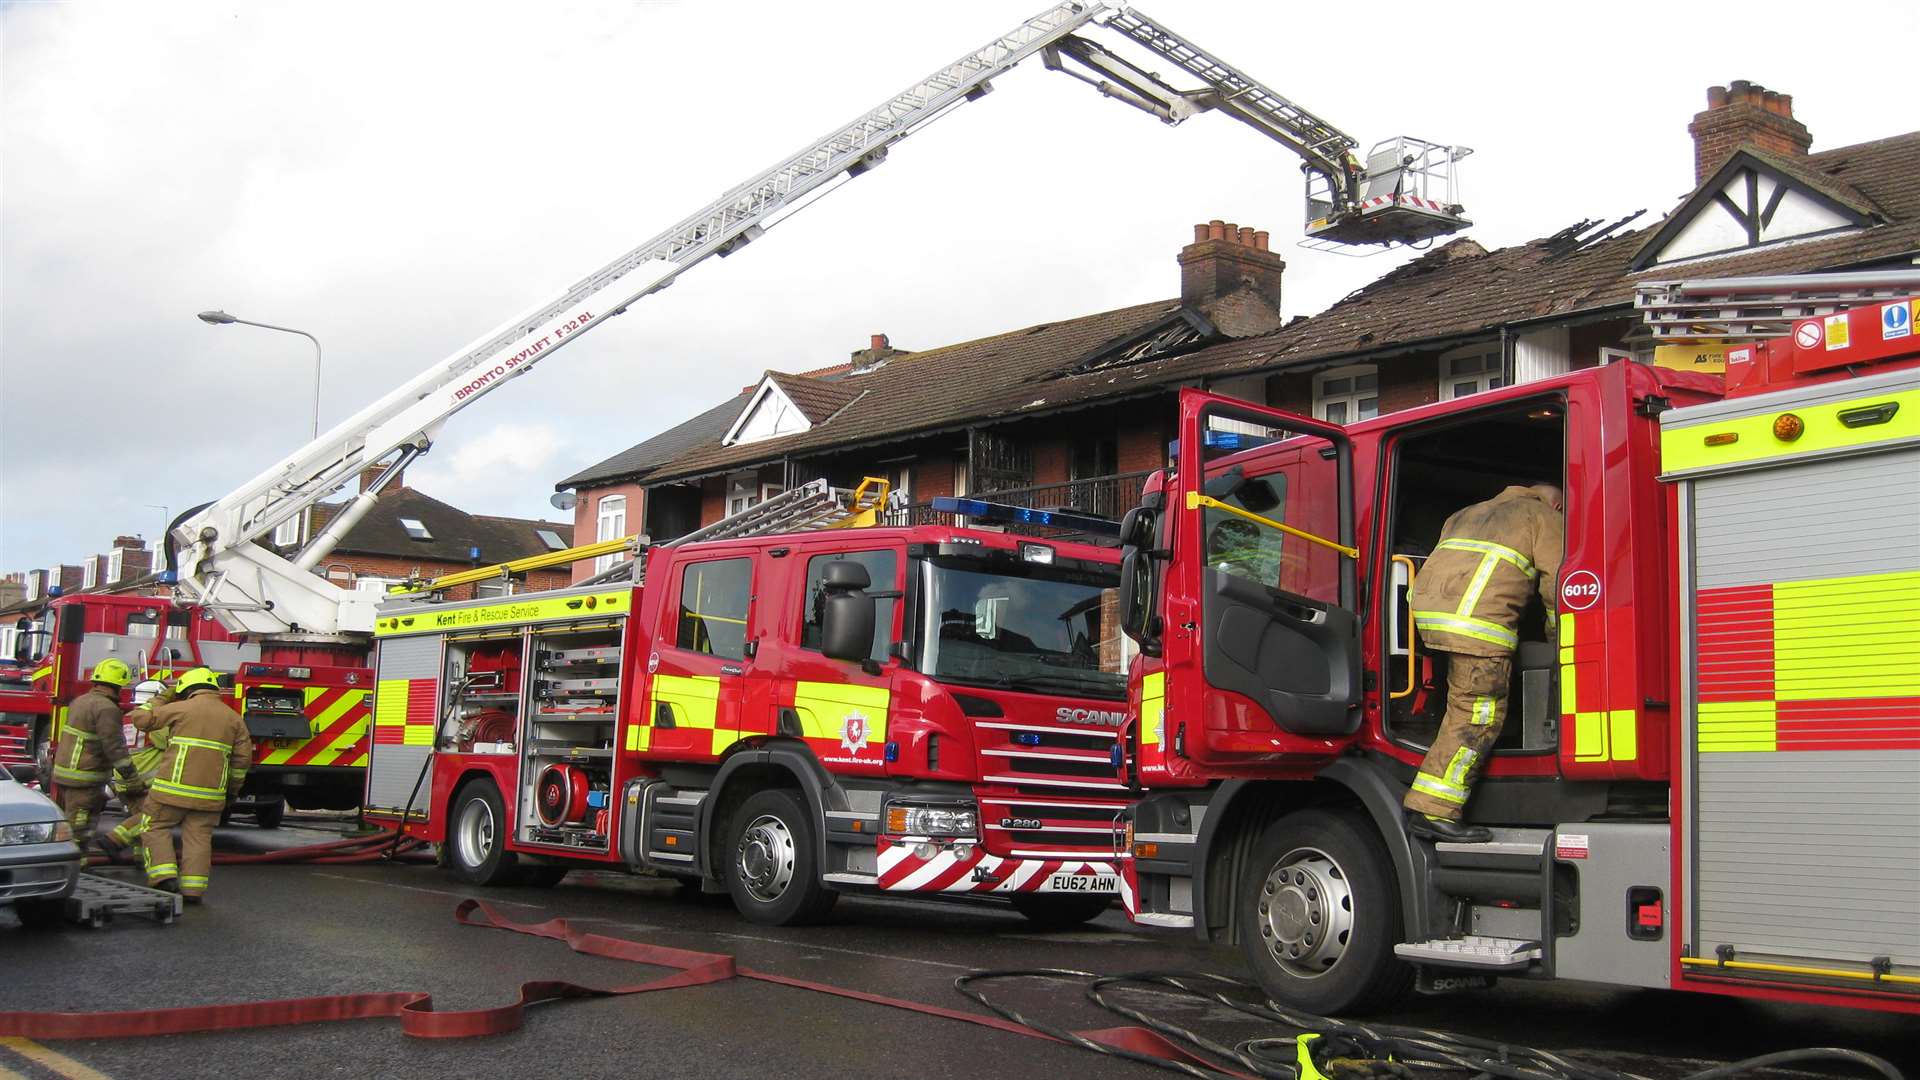 Firefighters tackle a serious blaze